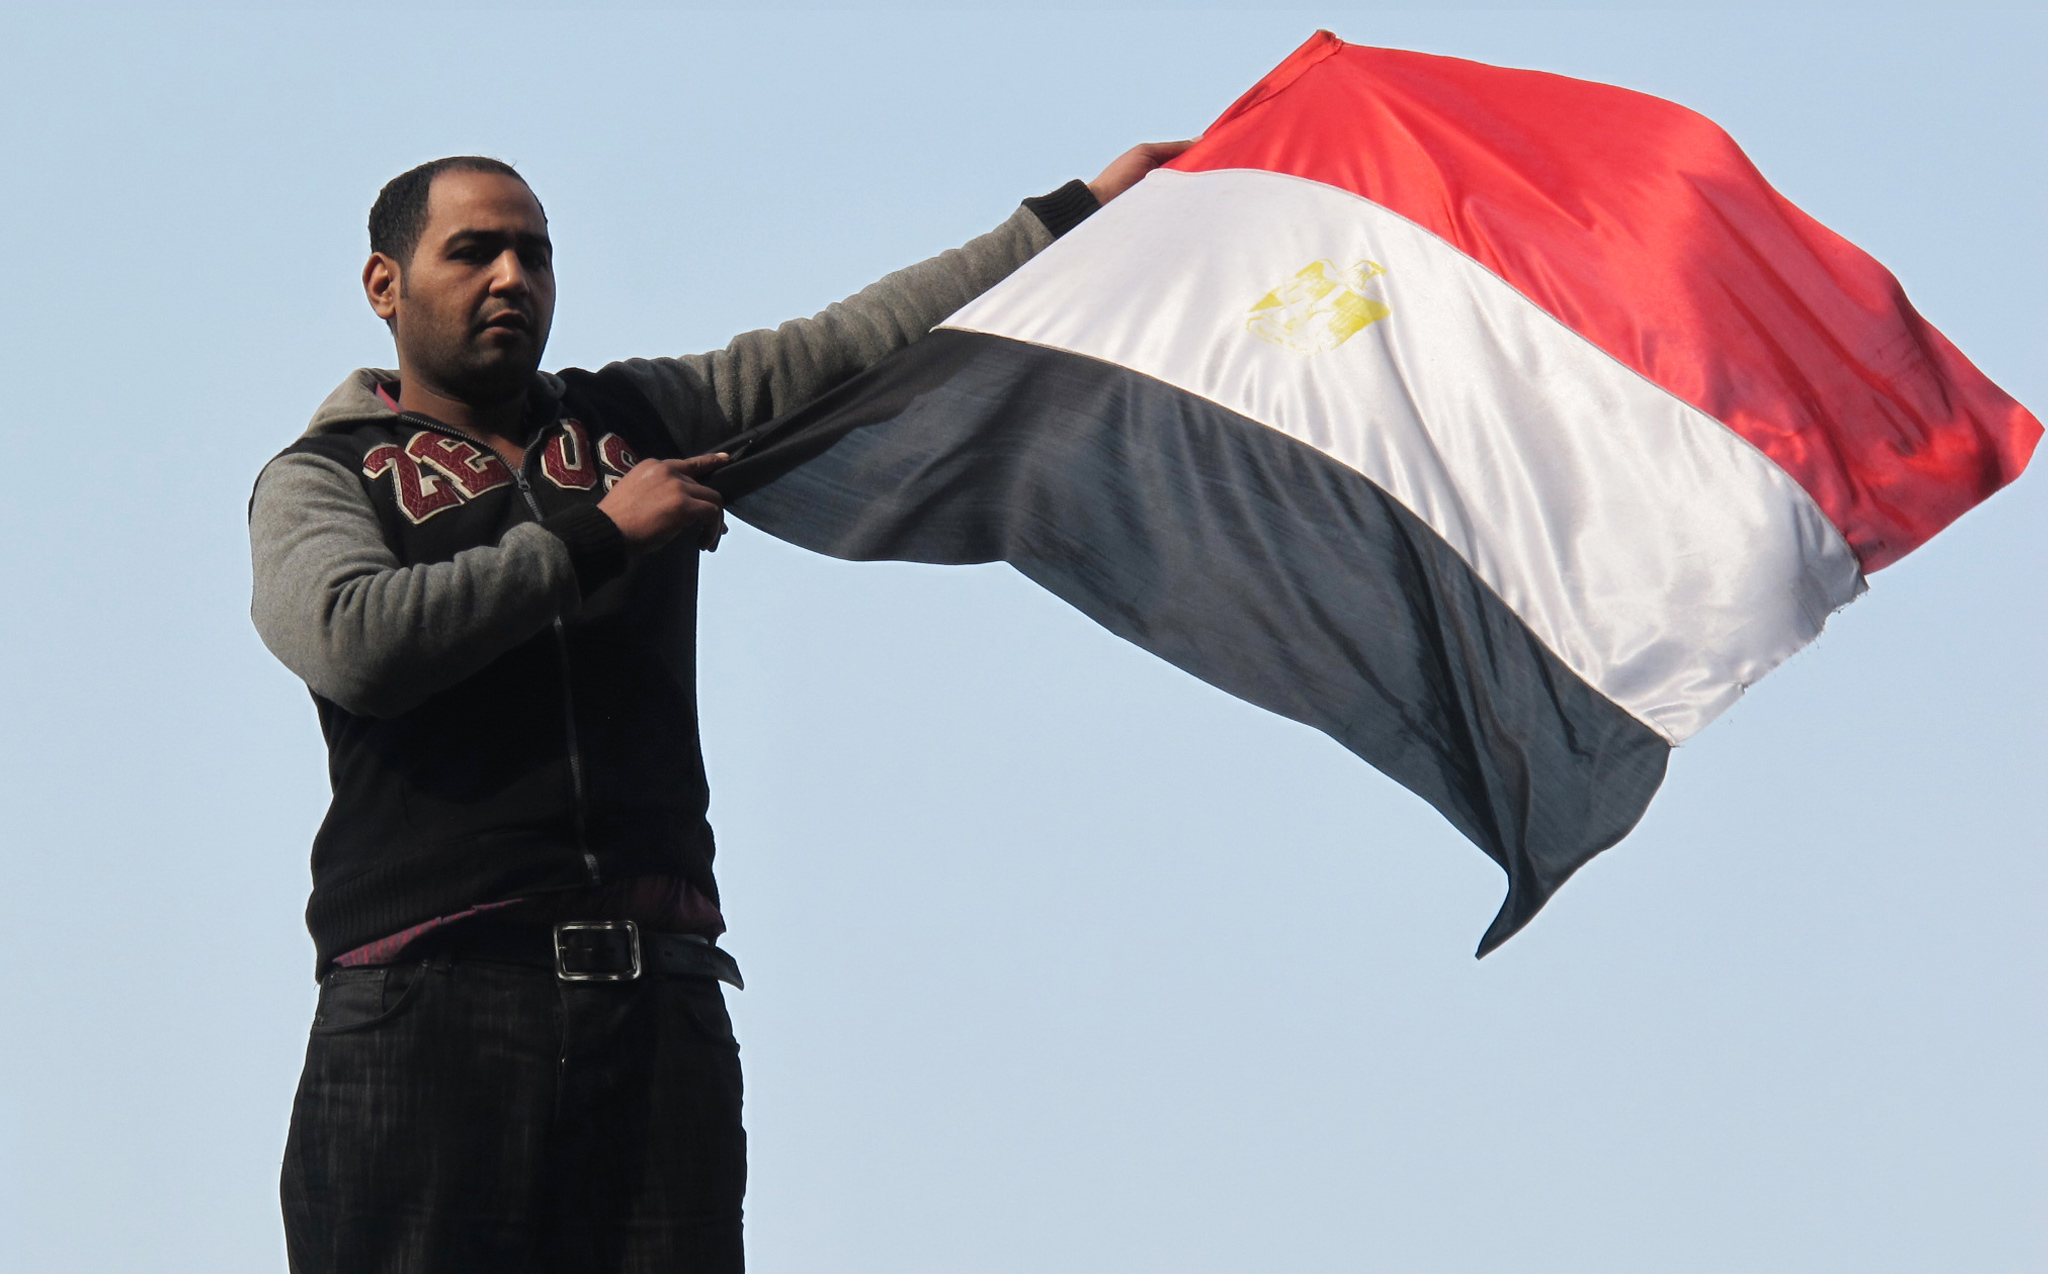  The revolution withstood the crackdown, despite an official death toll of 850, as well as thousands injured. <br>
Mubarak stepped down several days later, on February 11, 2011. Tahrir Square erupted in joy, amid cries of ‘Get out!’.
(Photo credit: Marc Daou)
